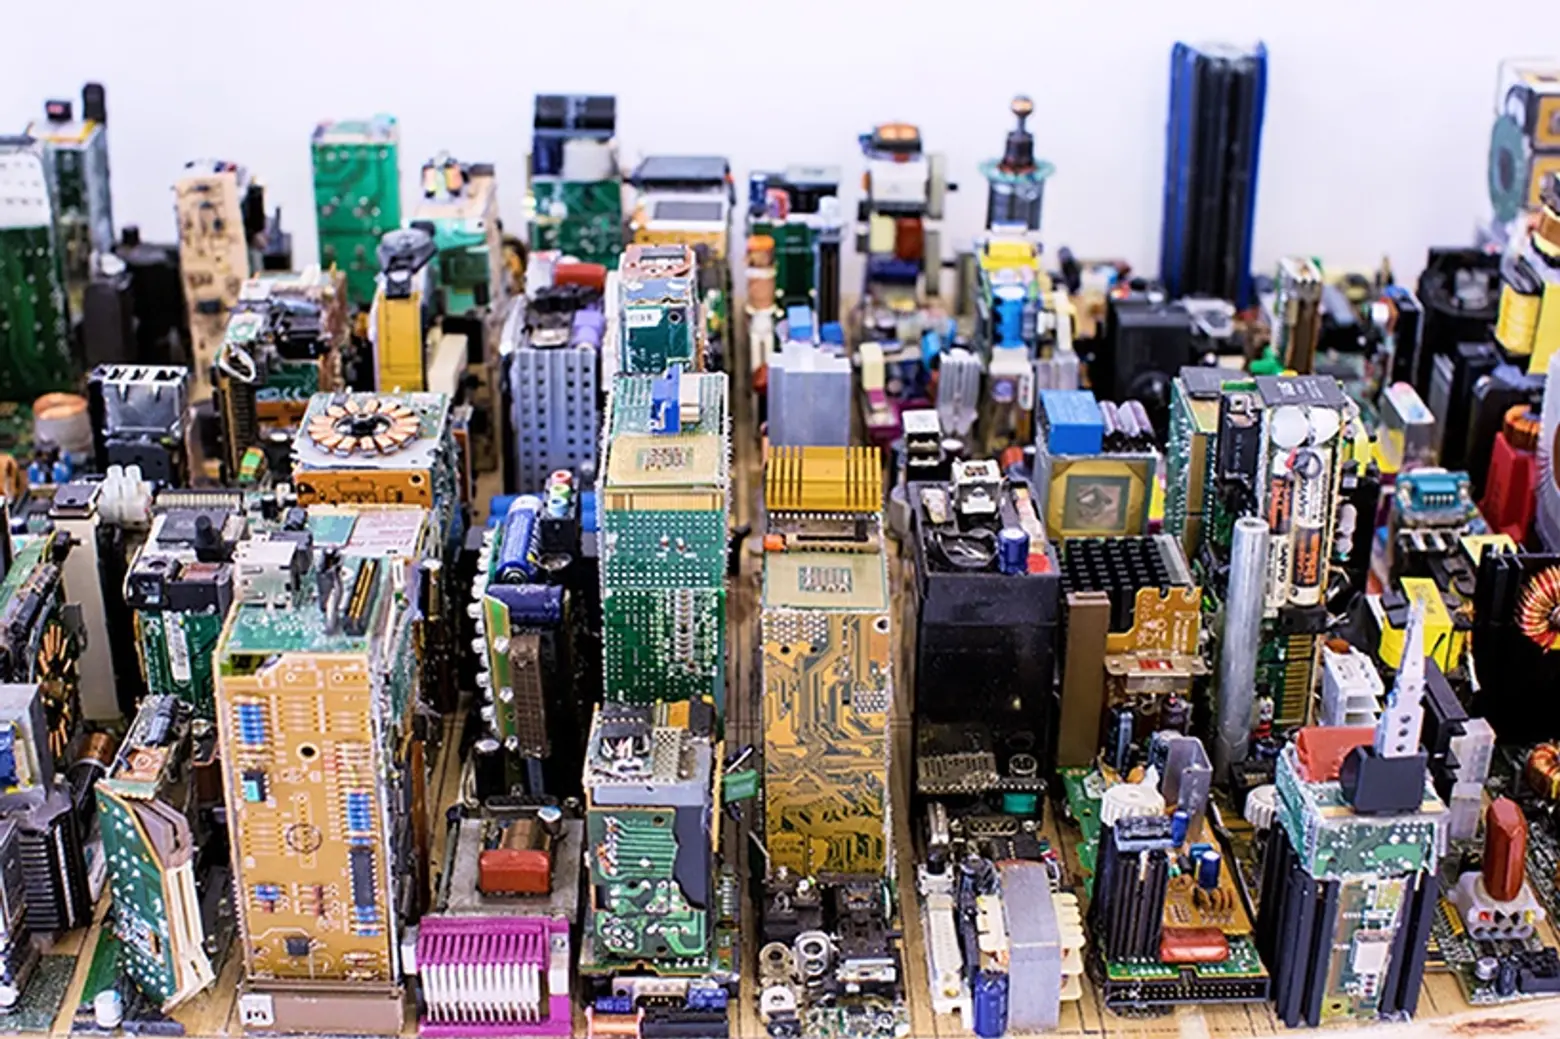 A 17-year-old artist created a model of Midtown out of recycled motherboards and hot glue sticks